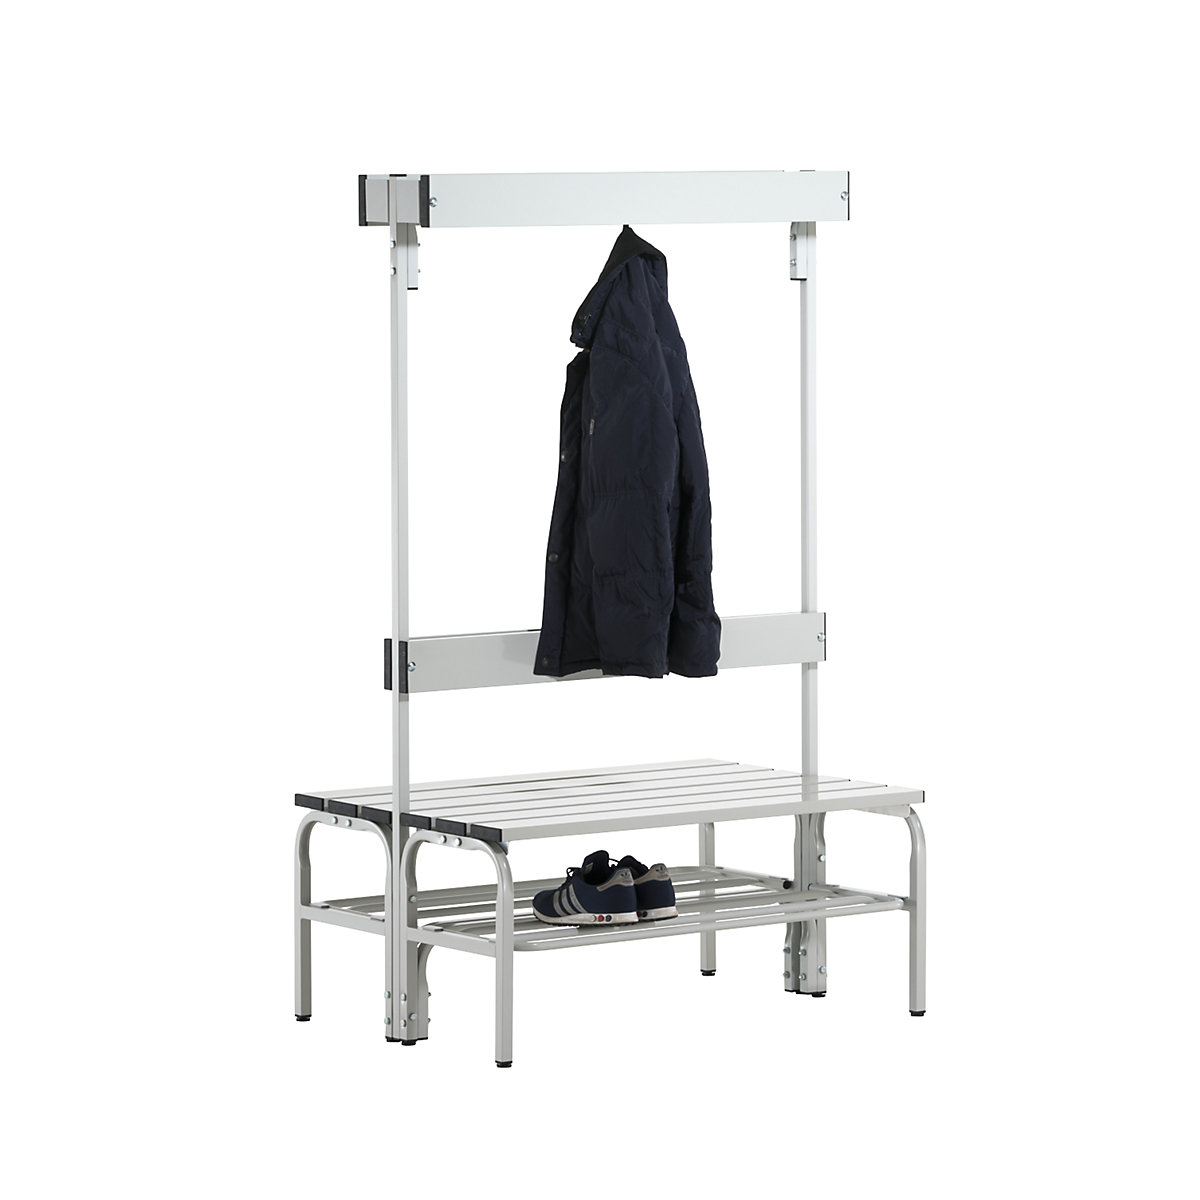 Sypro – Changing room bench made of stainless steel (Product illustration 9)